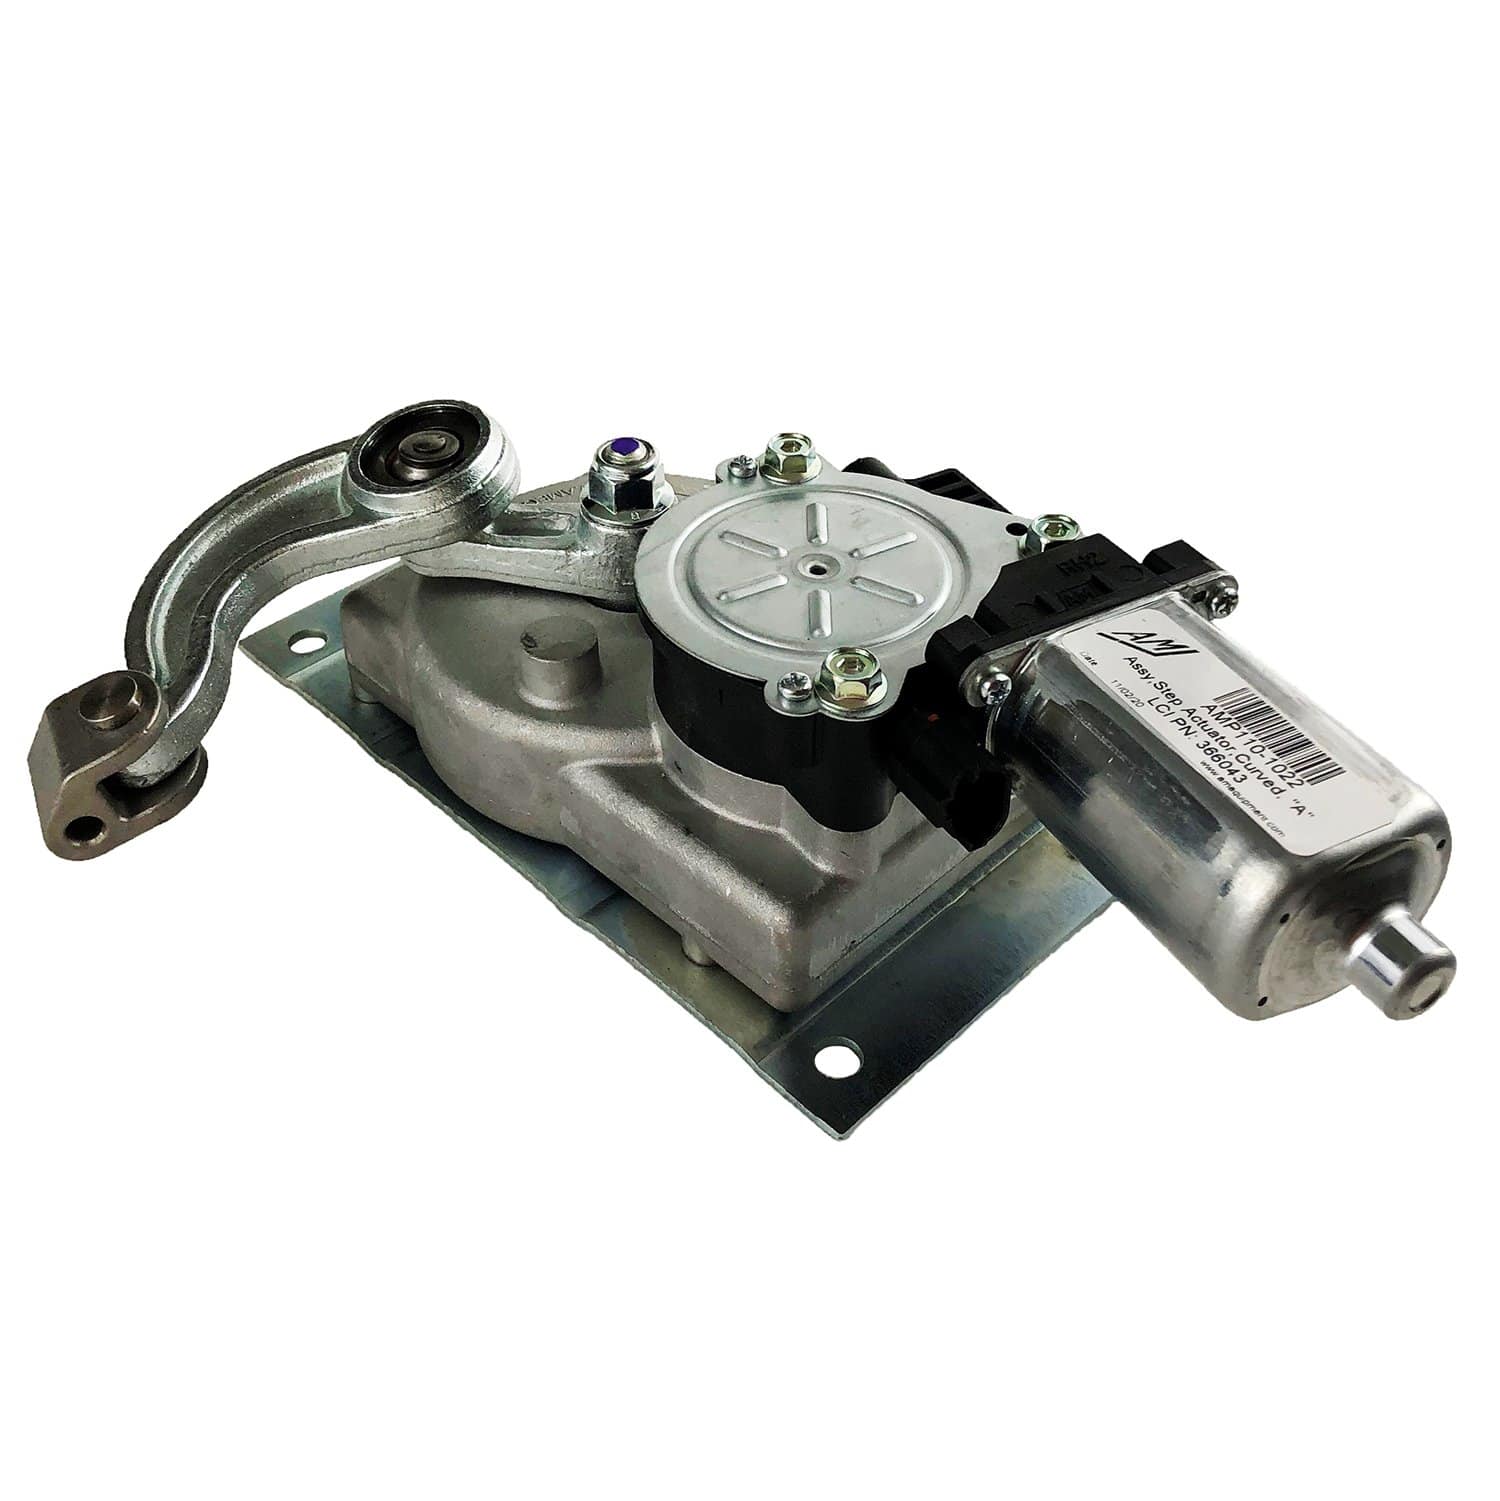 Am Equipment 110-1022 - 5:1 Gearbox with 214 Series Motor Curved A